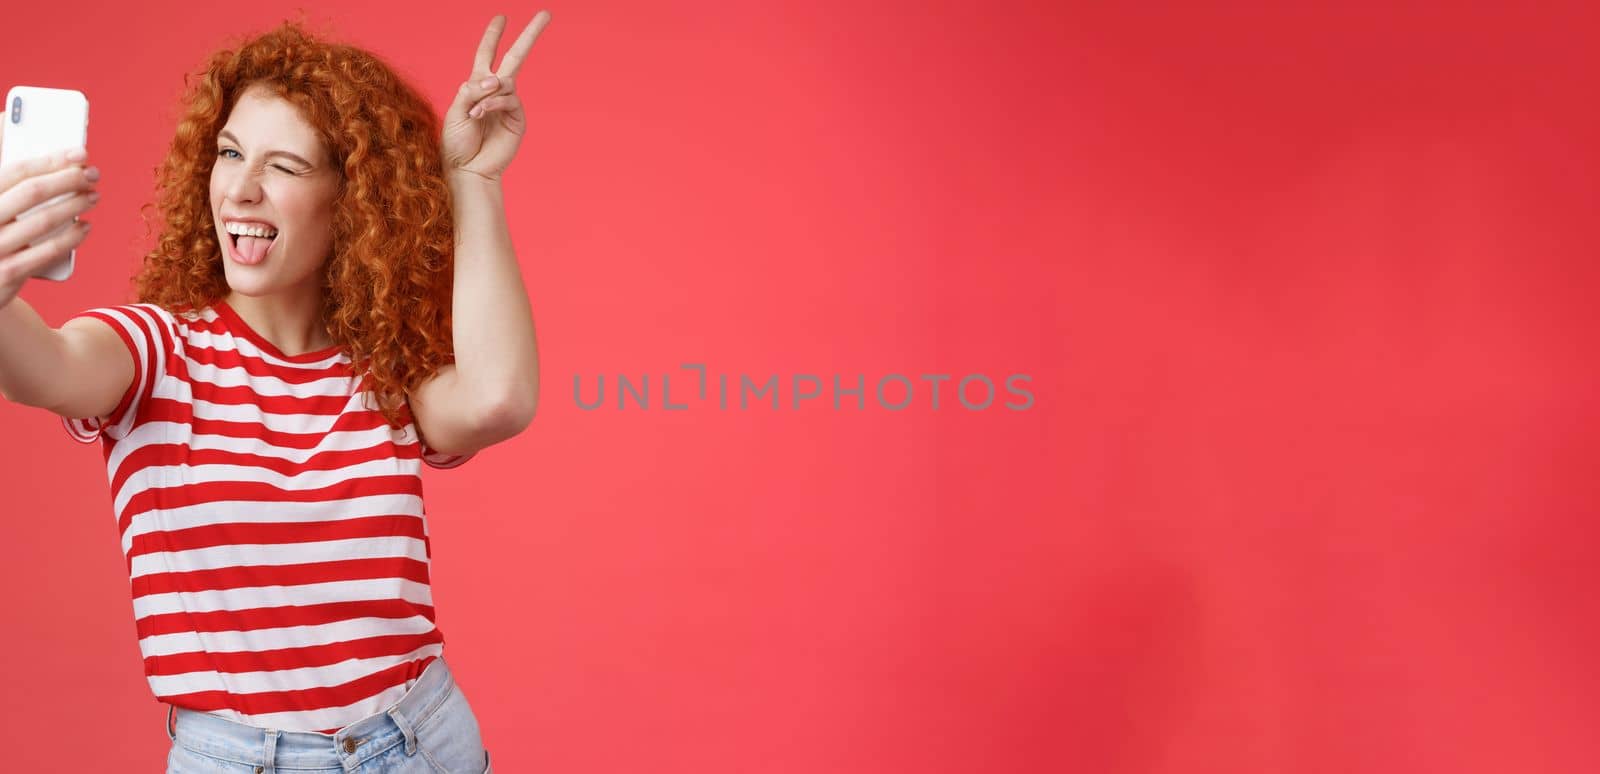 Lifestyle. Sassy fashionable playful good-looking redhead daring curly woman show peace victory animal ears gesture winking smartphone display record vlog taking selfie awesome phone camera red background.